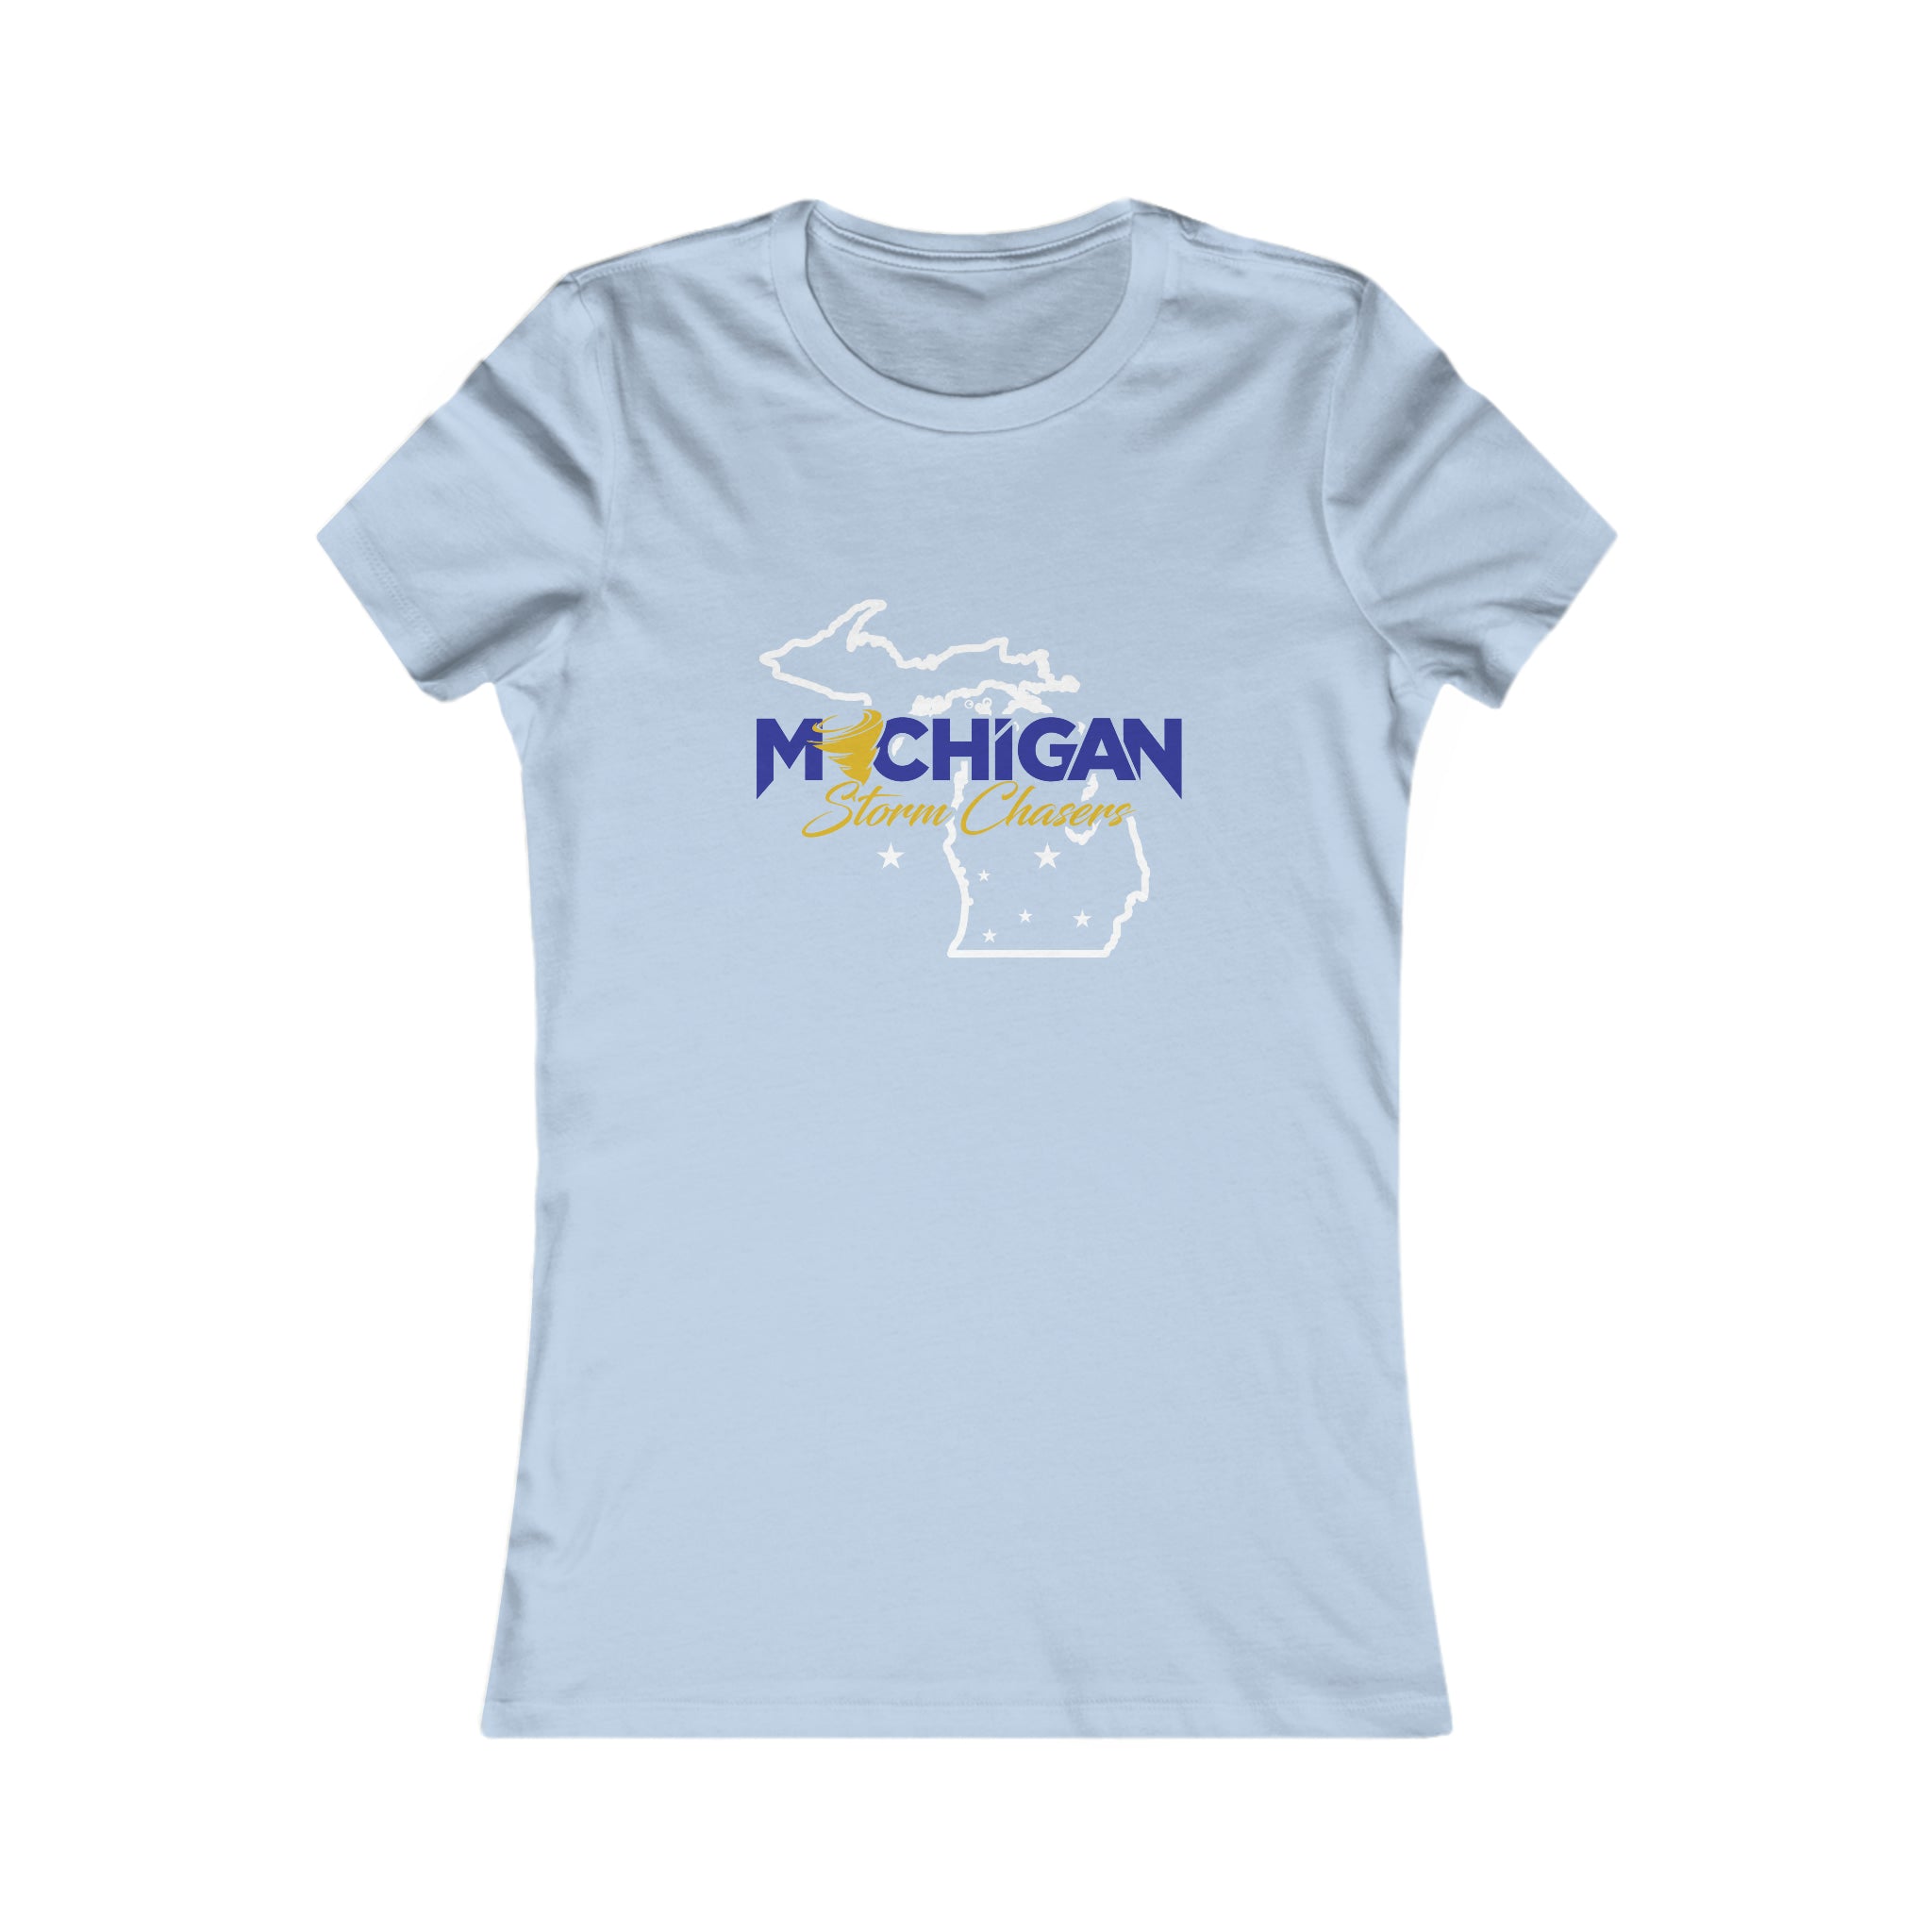 Michigan Storm Chasers Women's Tee 